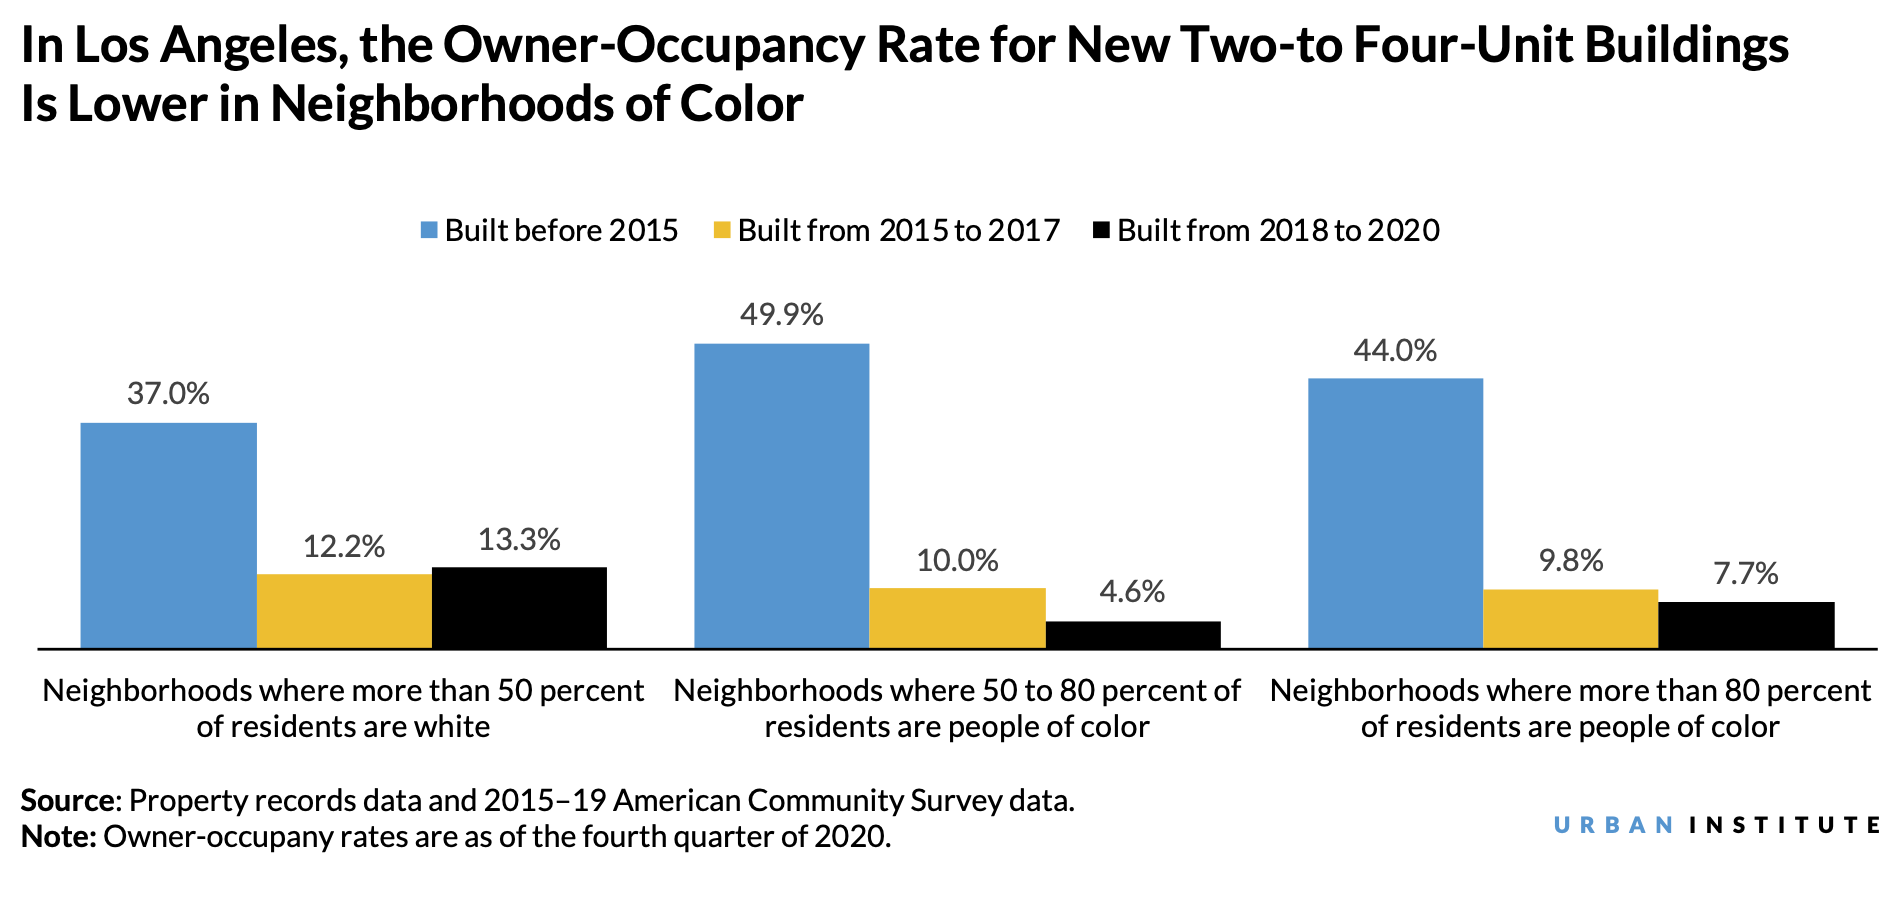 Bar chart showing that in Los Angeles, the owner-occupancy rate for new two-to-four-unit buildings has been falling since 2015